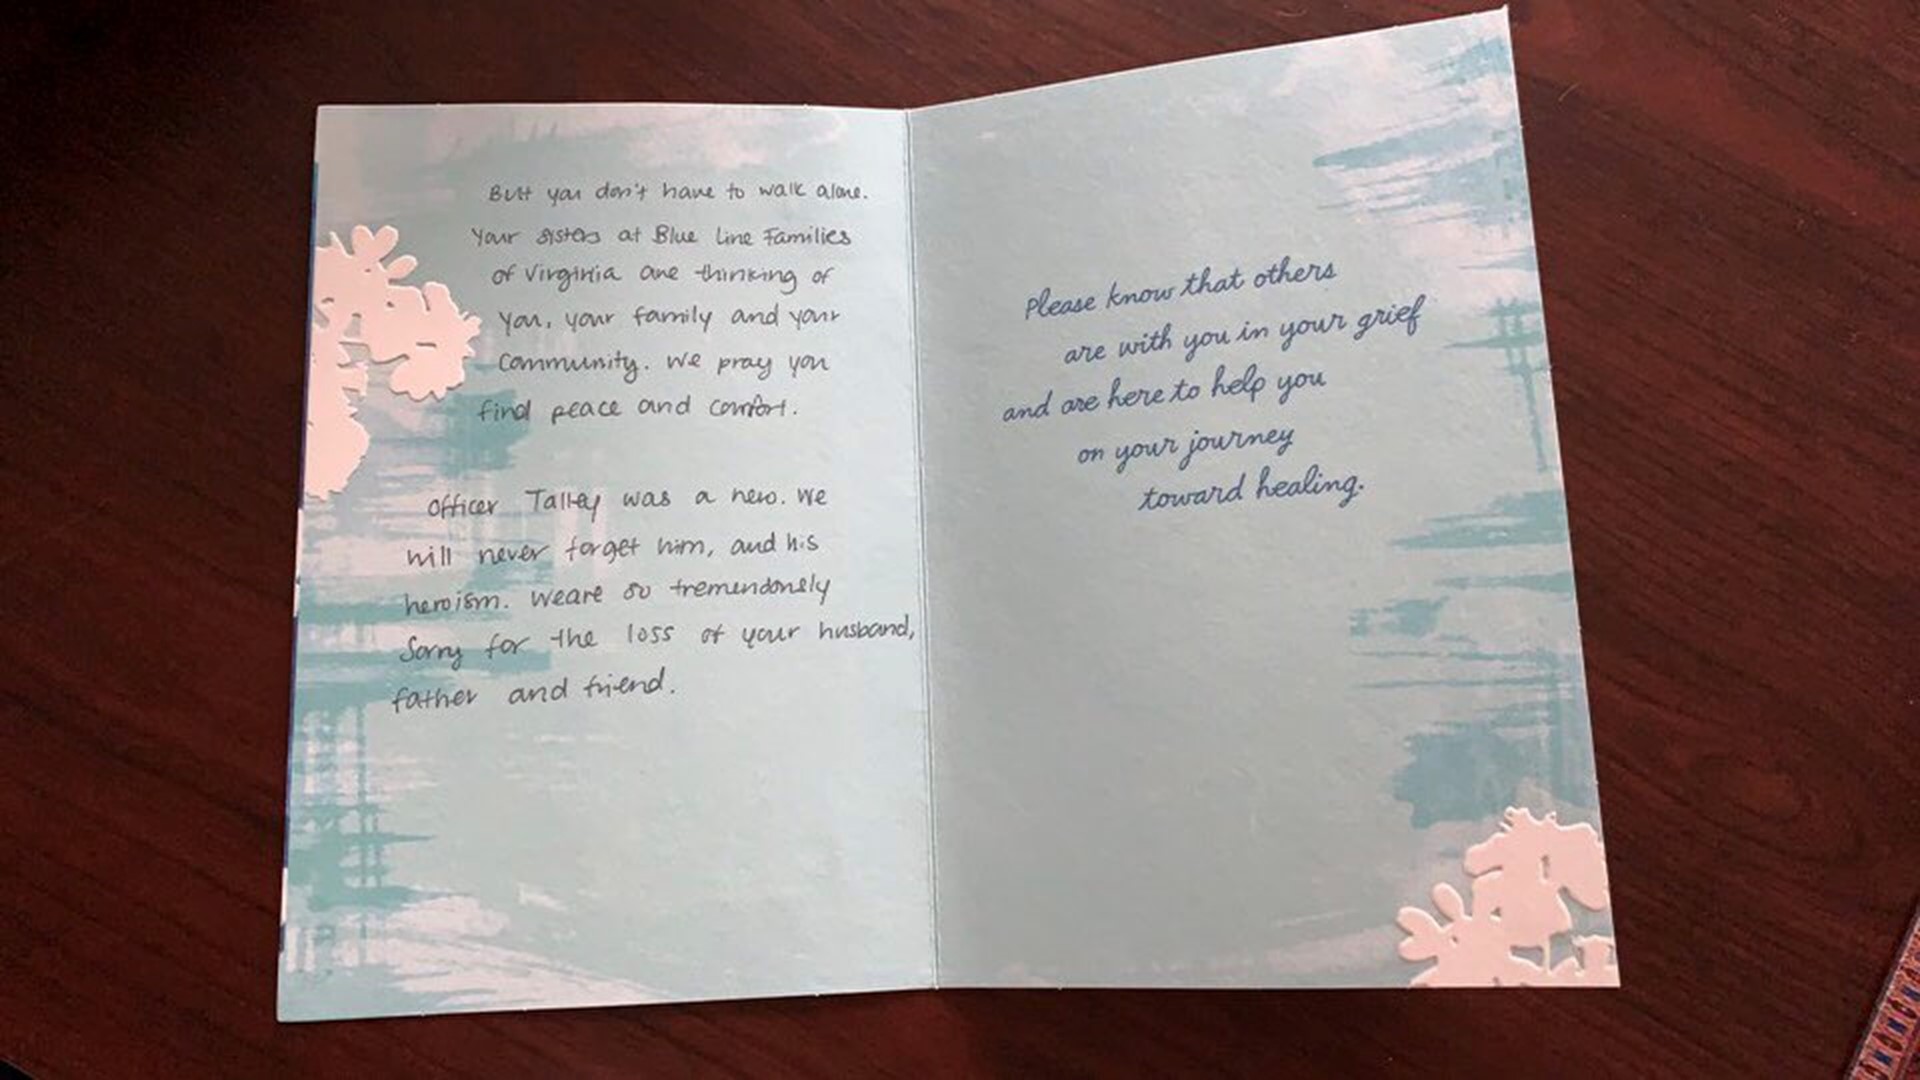 The Blue Line Families of Virginia sent a special card to the Boulder Police Department this week after a tragic shooting claimed the life of Officer Eric Talley.